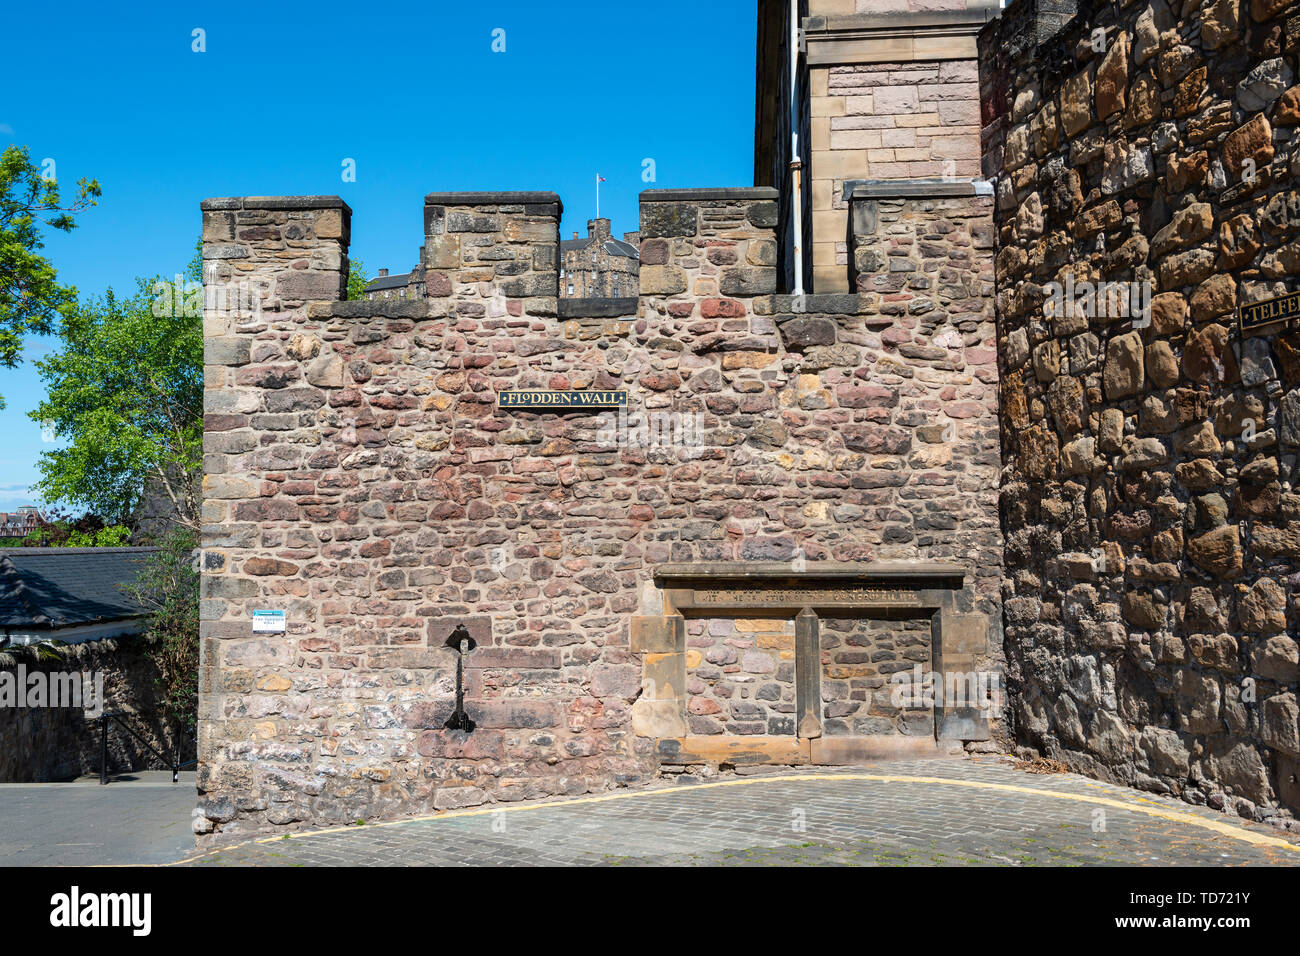 Remains of 16th century Flodden Wall, with Telfer Wall (17th century) on right, on the Vennel in Edinburgh Old Town, Scotland, UK Stock Photo